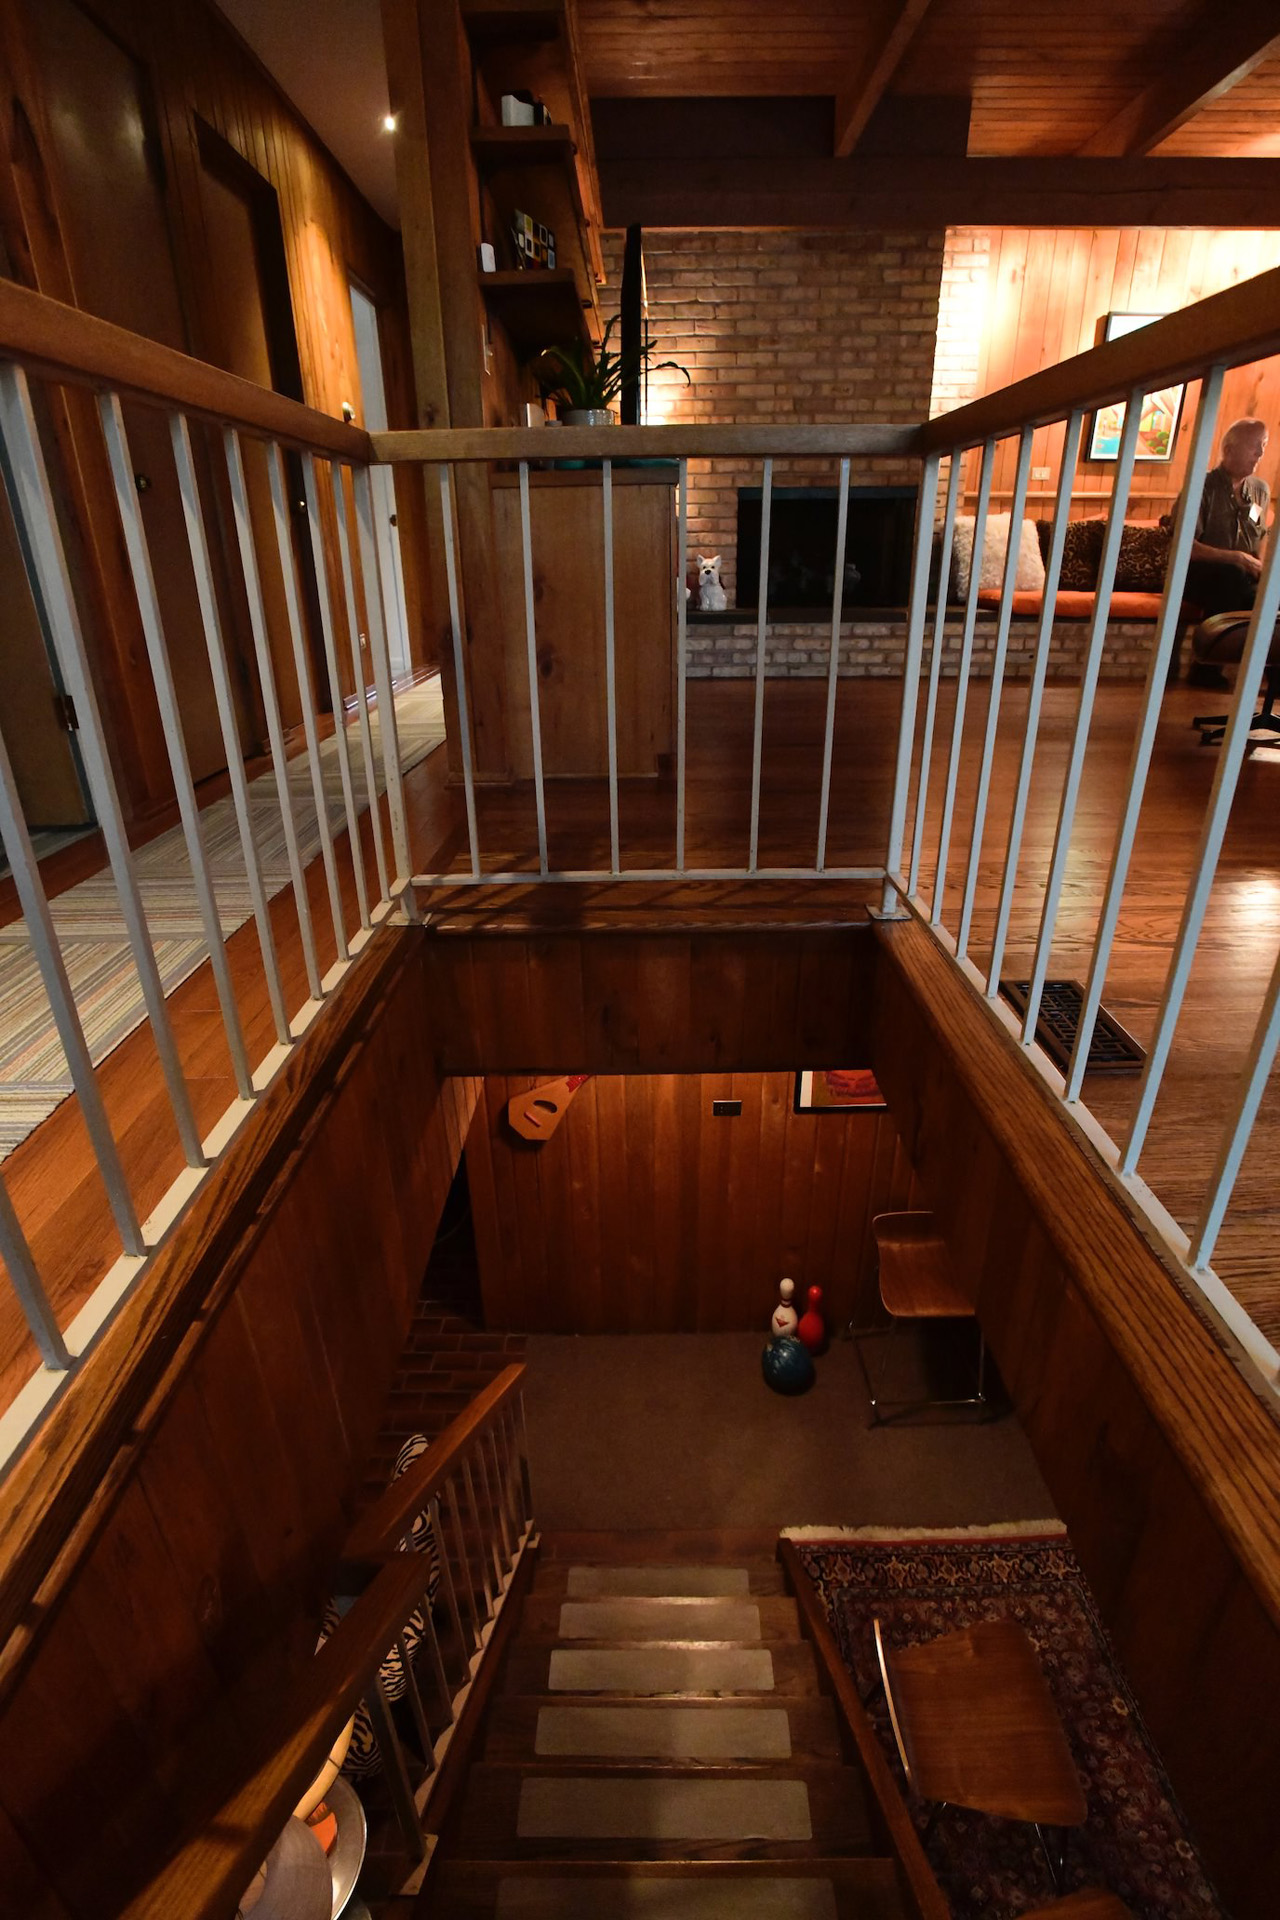 Nice shot of the original stairway to the lower level